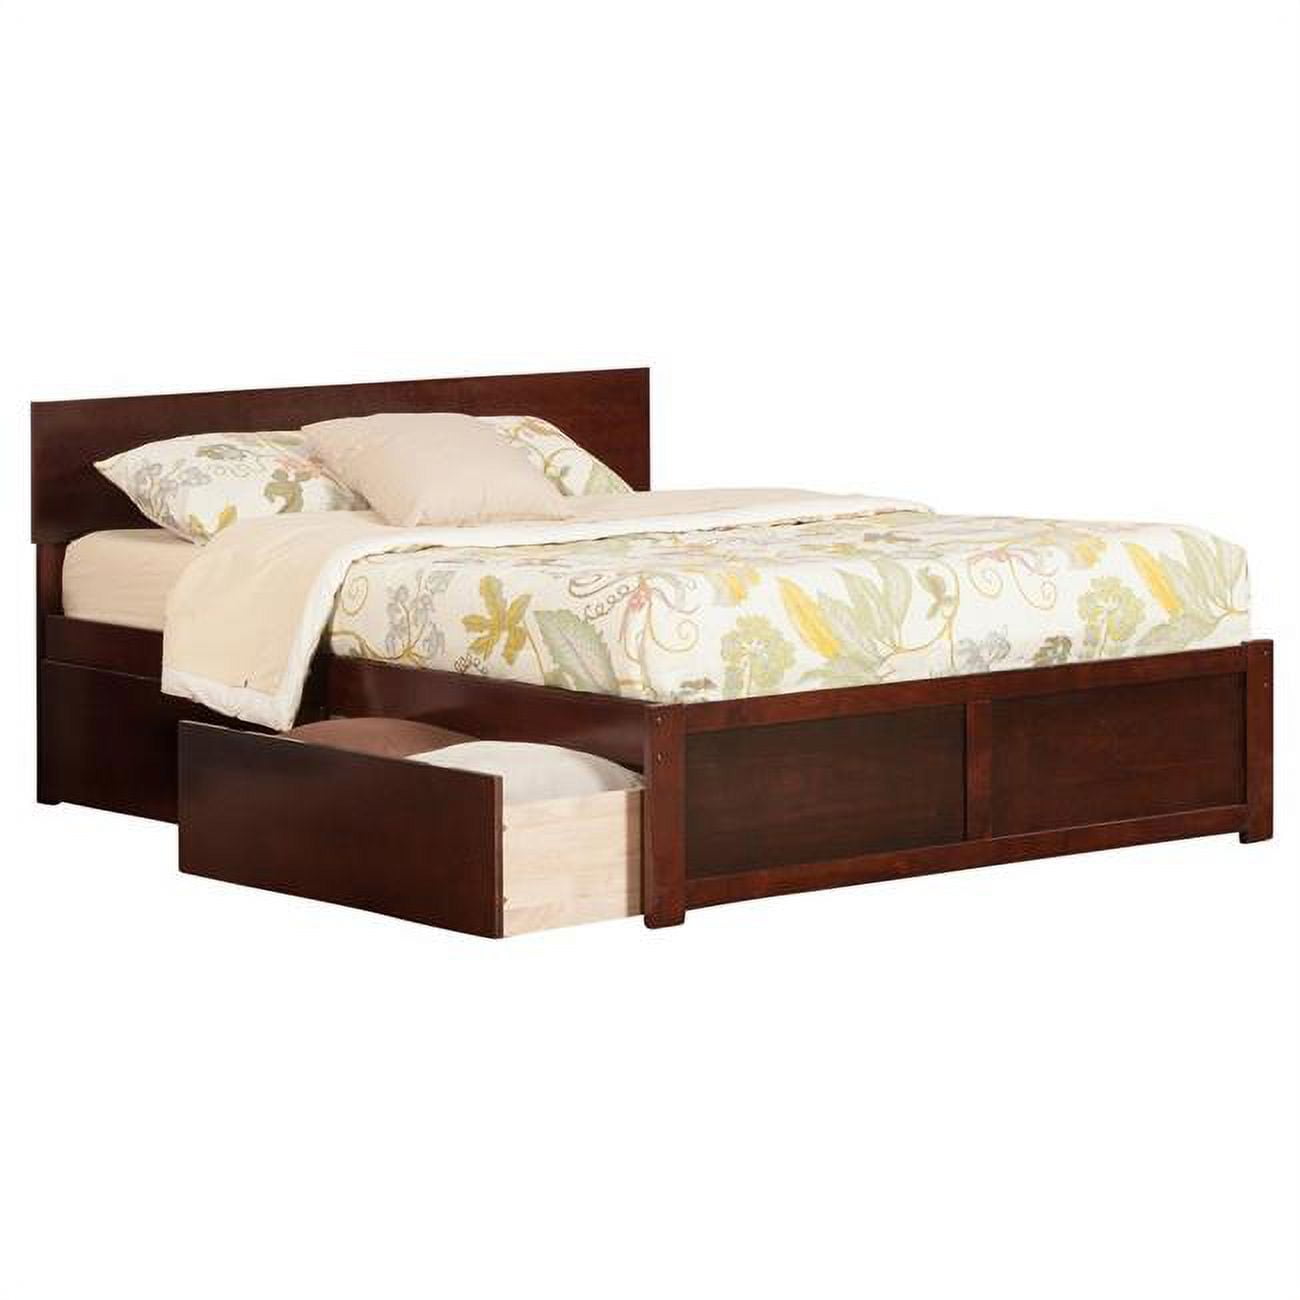 Picture of Atlantic Furniture AR8616031 Madison Extra LargeBed with Match Footboard in Espresso, Twin Size